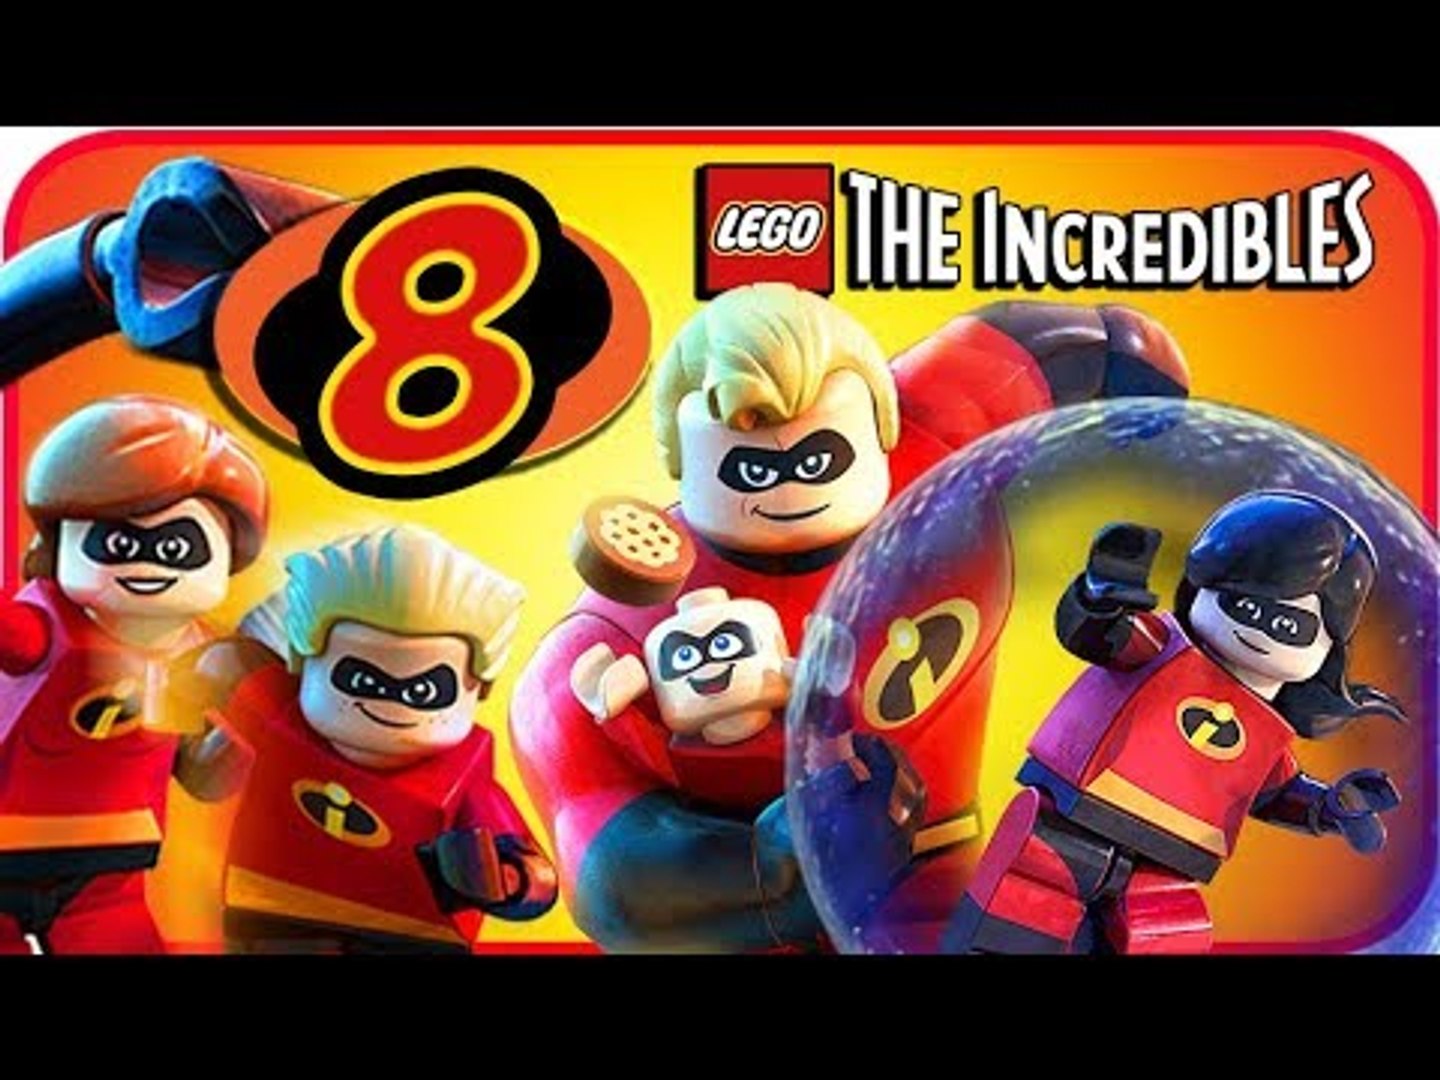 chasquido Frontera Intenso LEGO The Incredibles Walkthrough Part 8 (PS4, Switch, XB1) No Commentary  Co-op - video Dailymotion